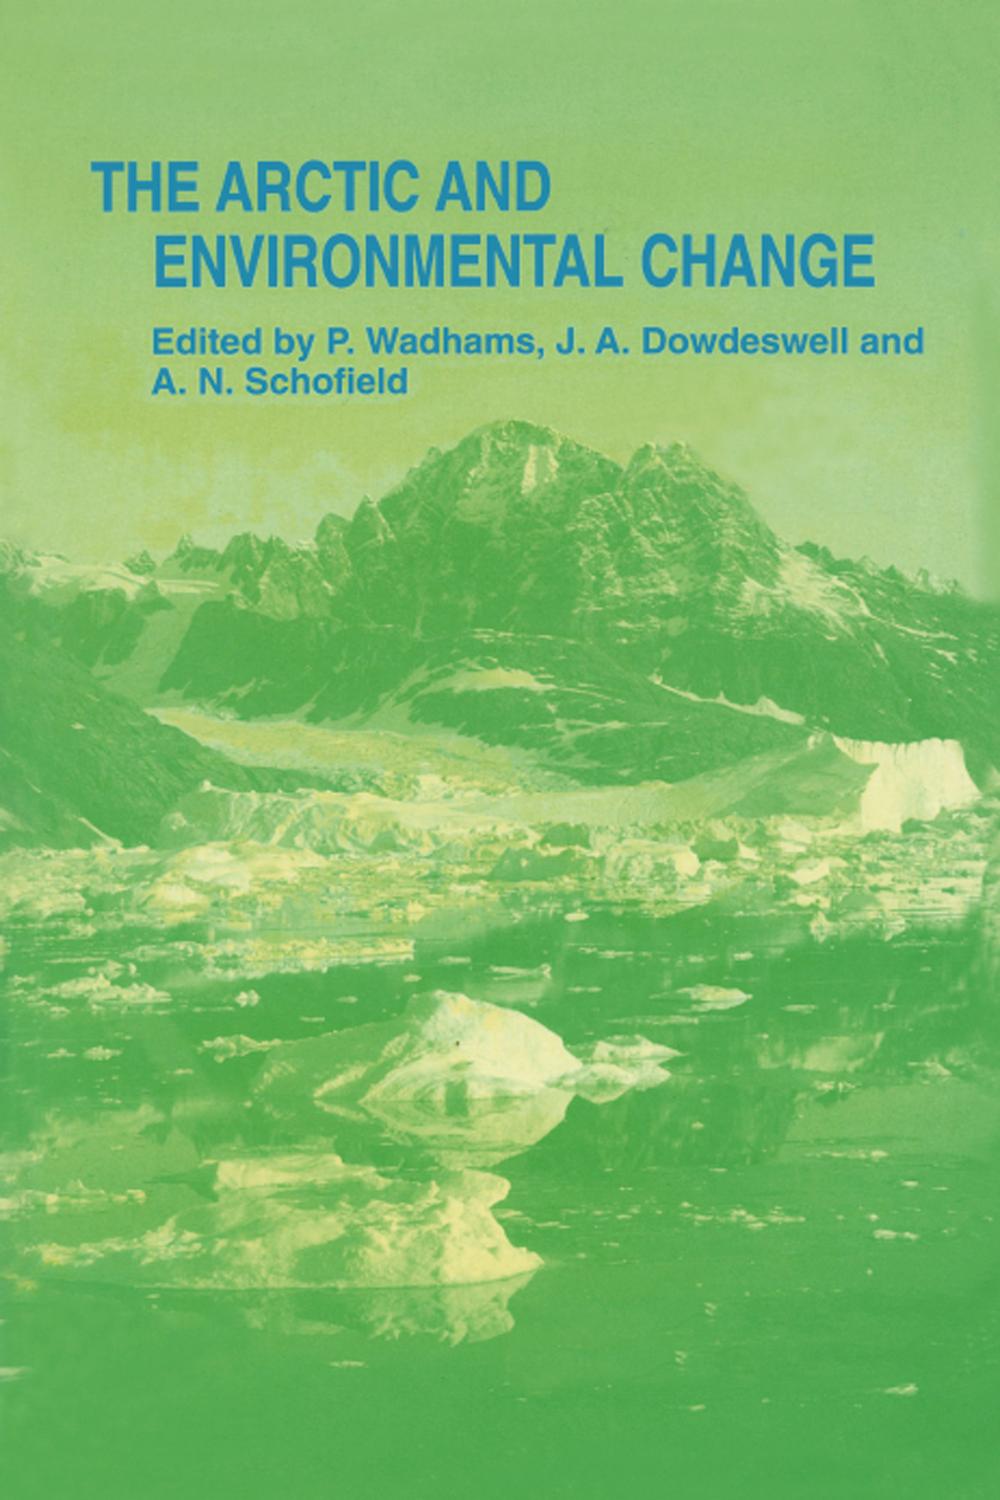 Arctic and Environmental Change - J.A. Dowdeswell